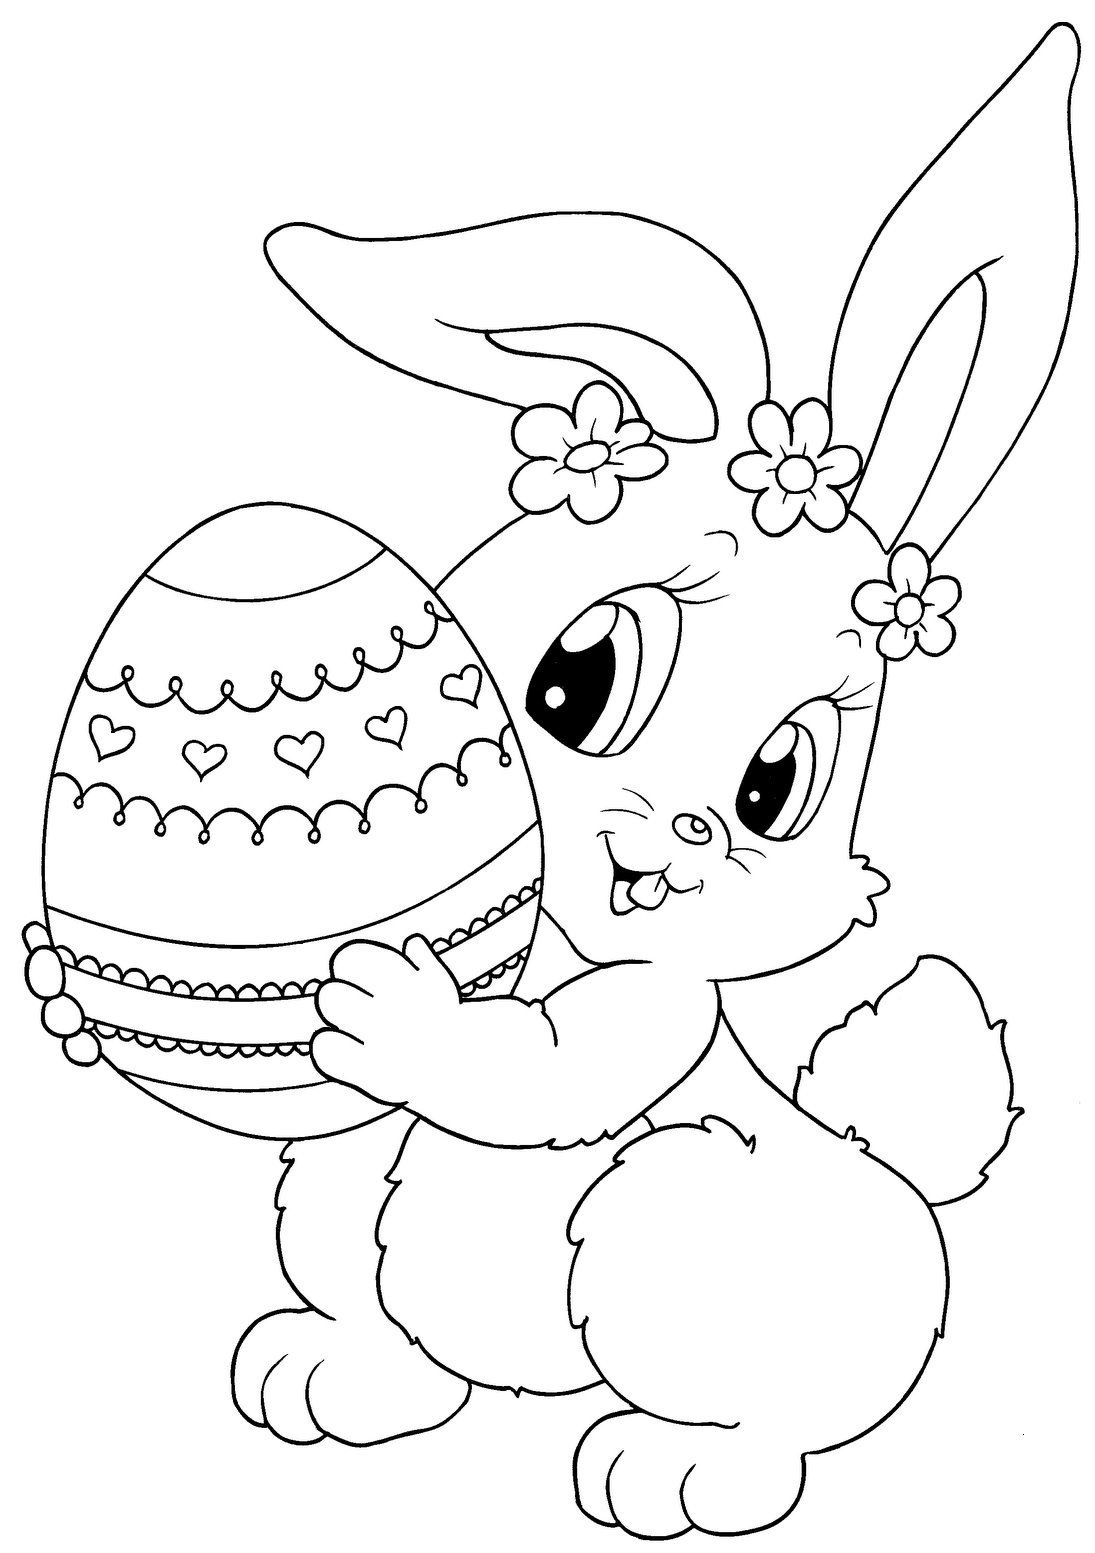 Top 15 Free Printable Easter Bunny Coloring Pages Online | Зентангл - Free Printable Easter Colouring Sheets